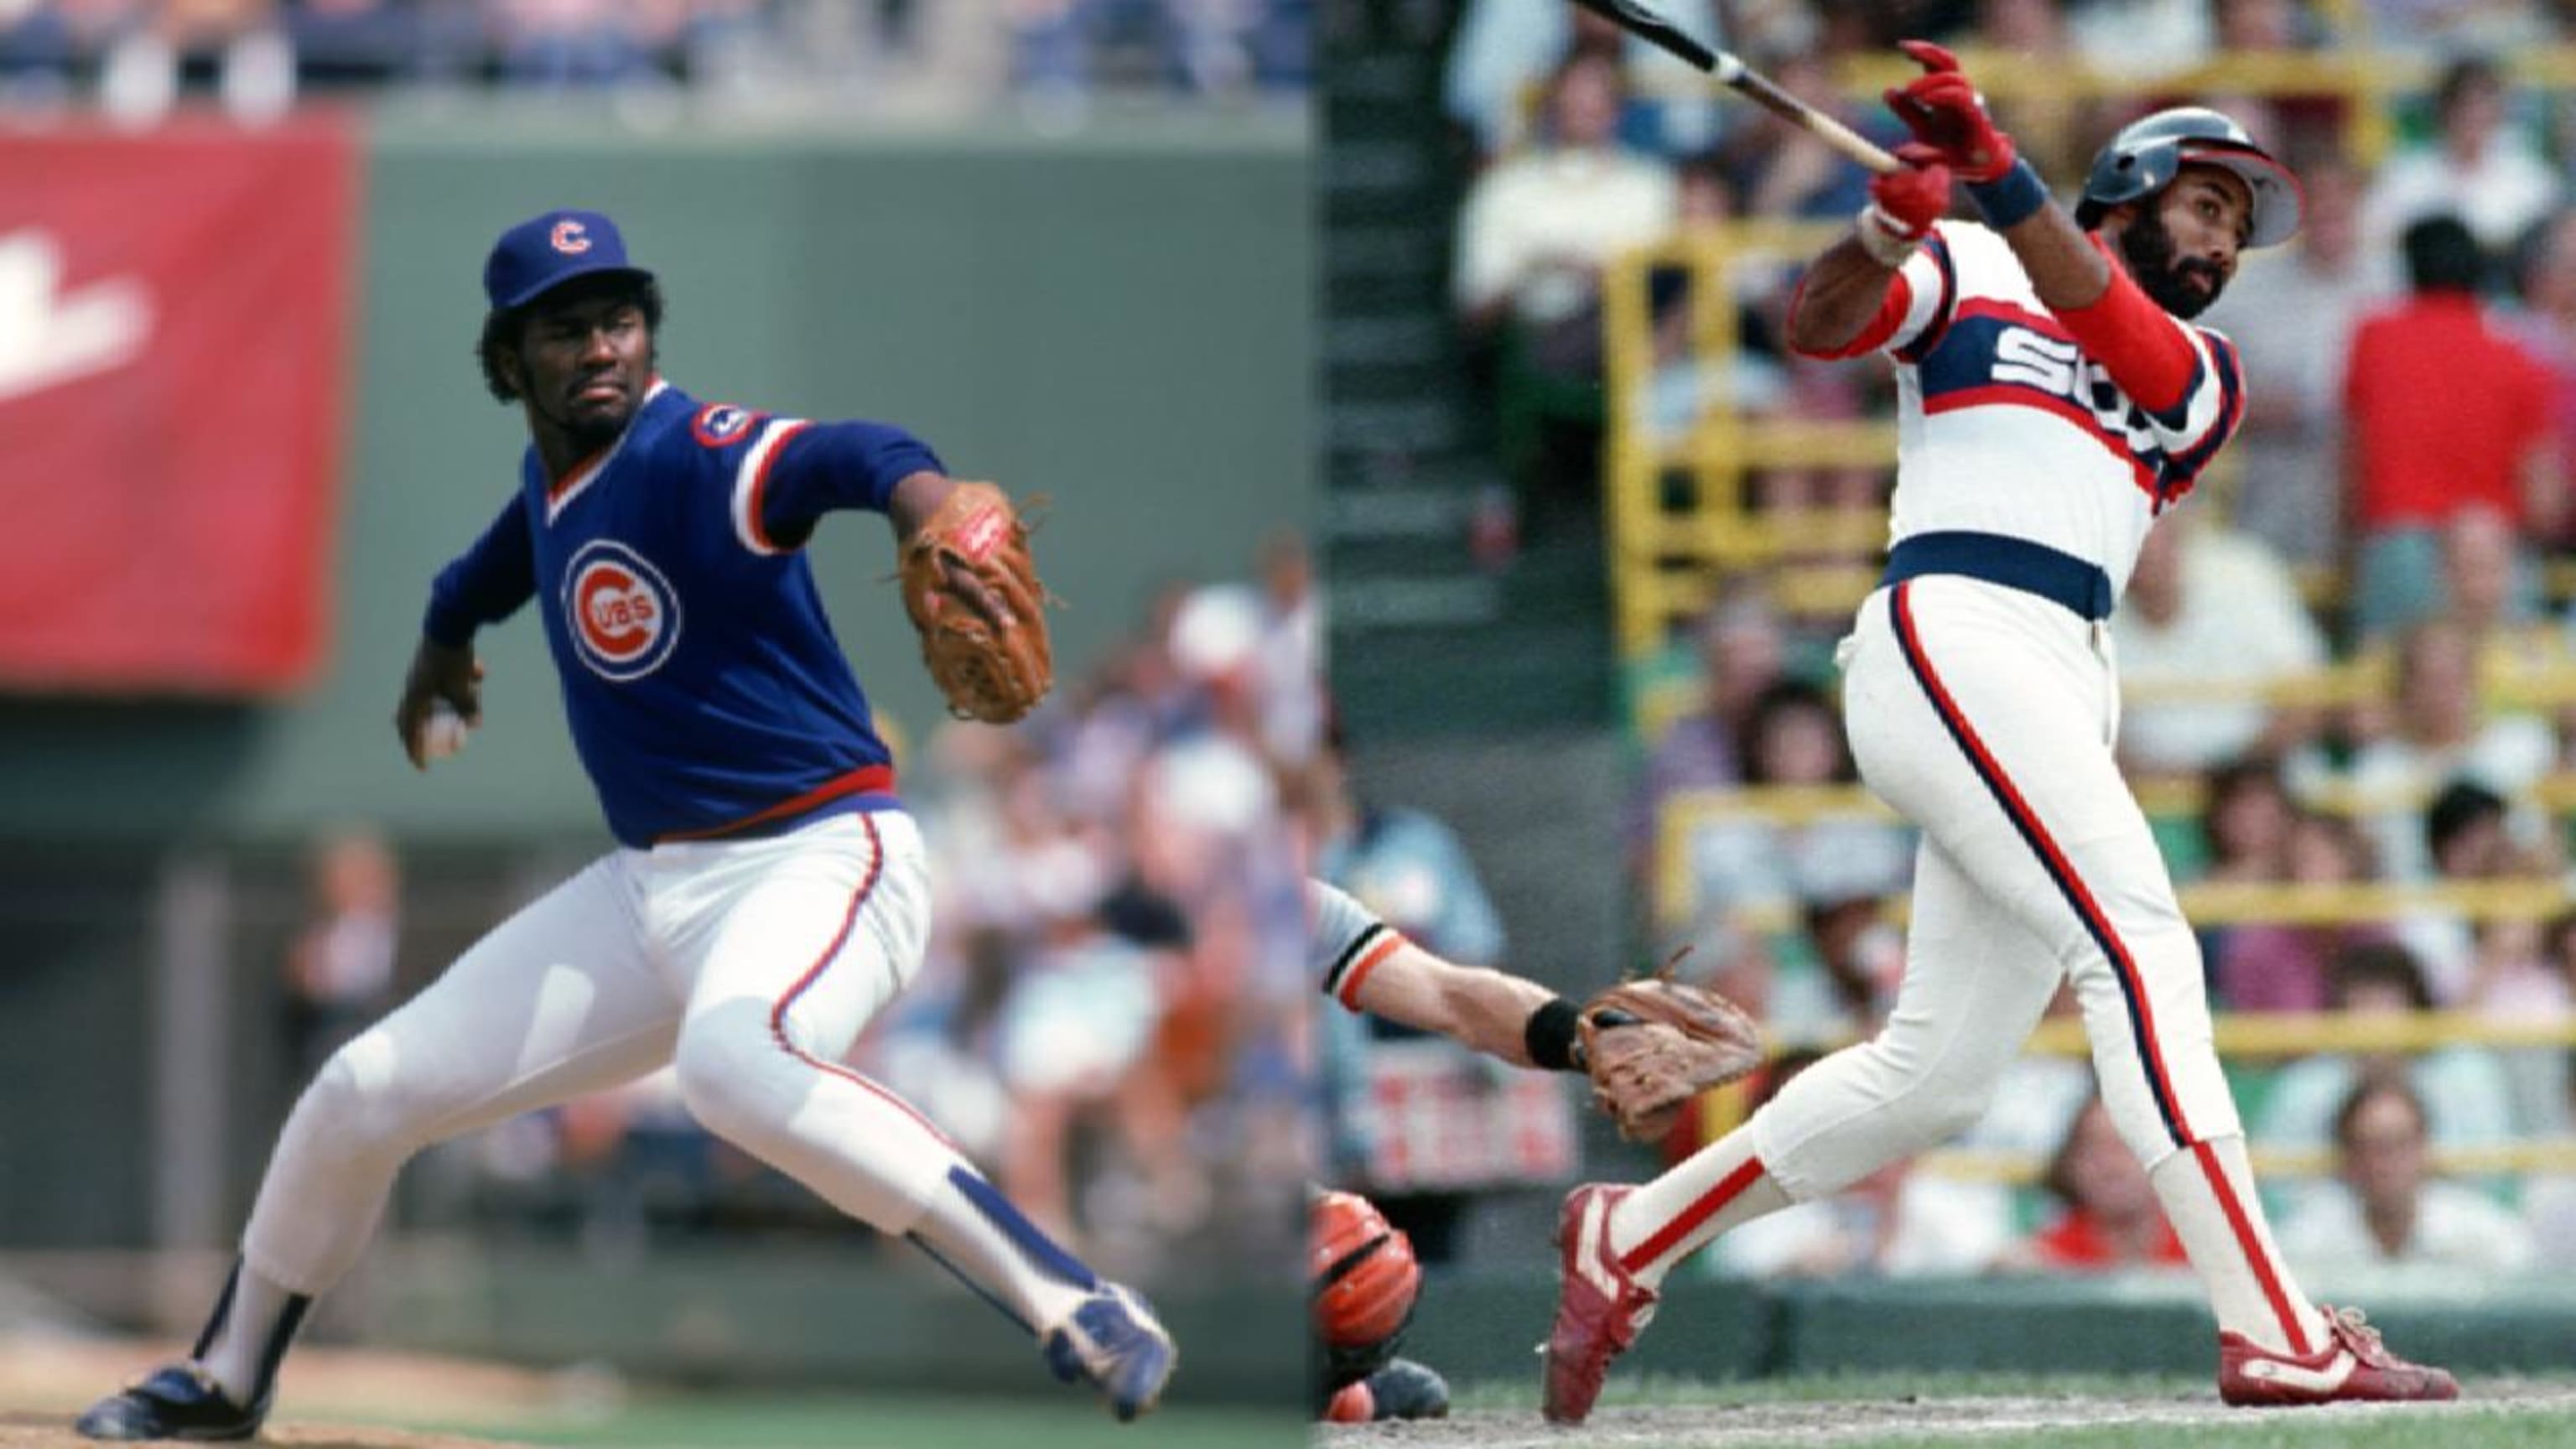 Harold Baines, Lee Smith elected to Baseball Hall of Fame 